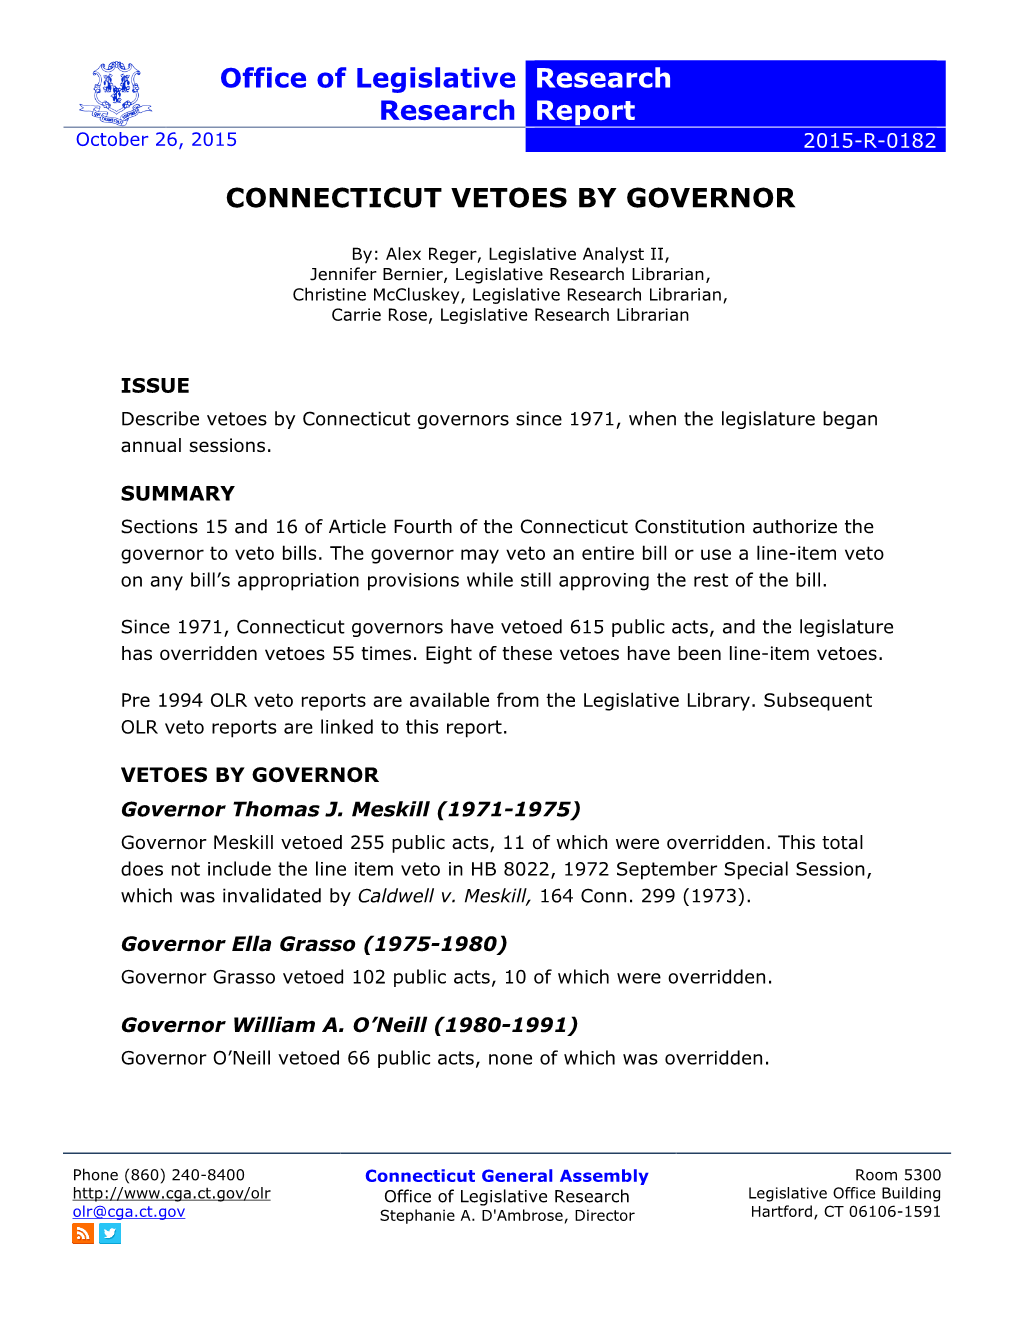 Connecticut Vetoes by Governor